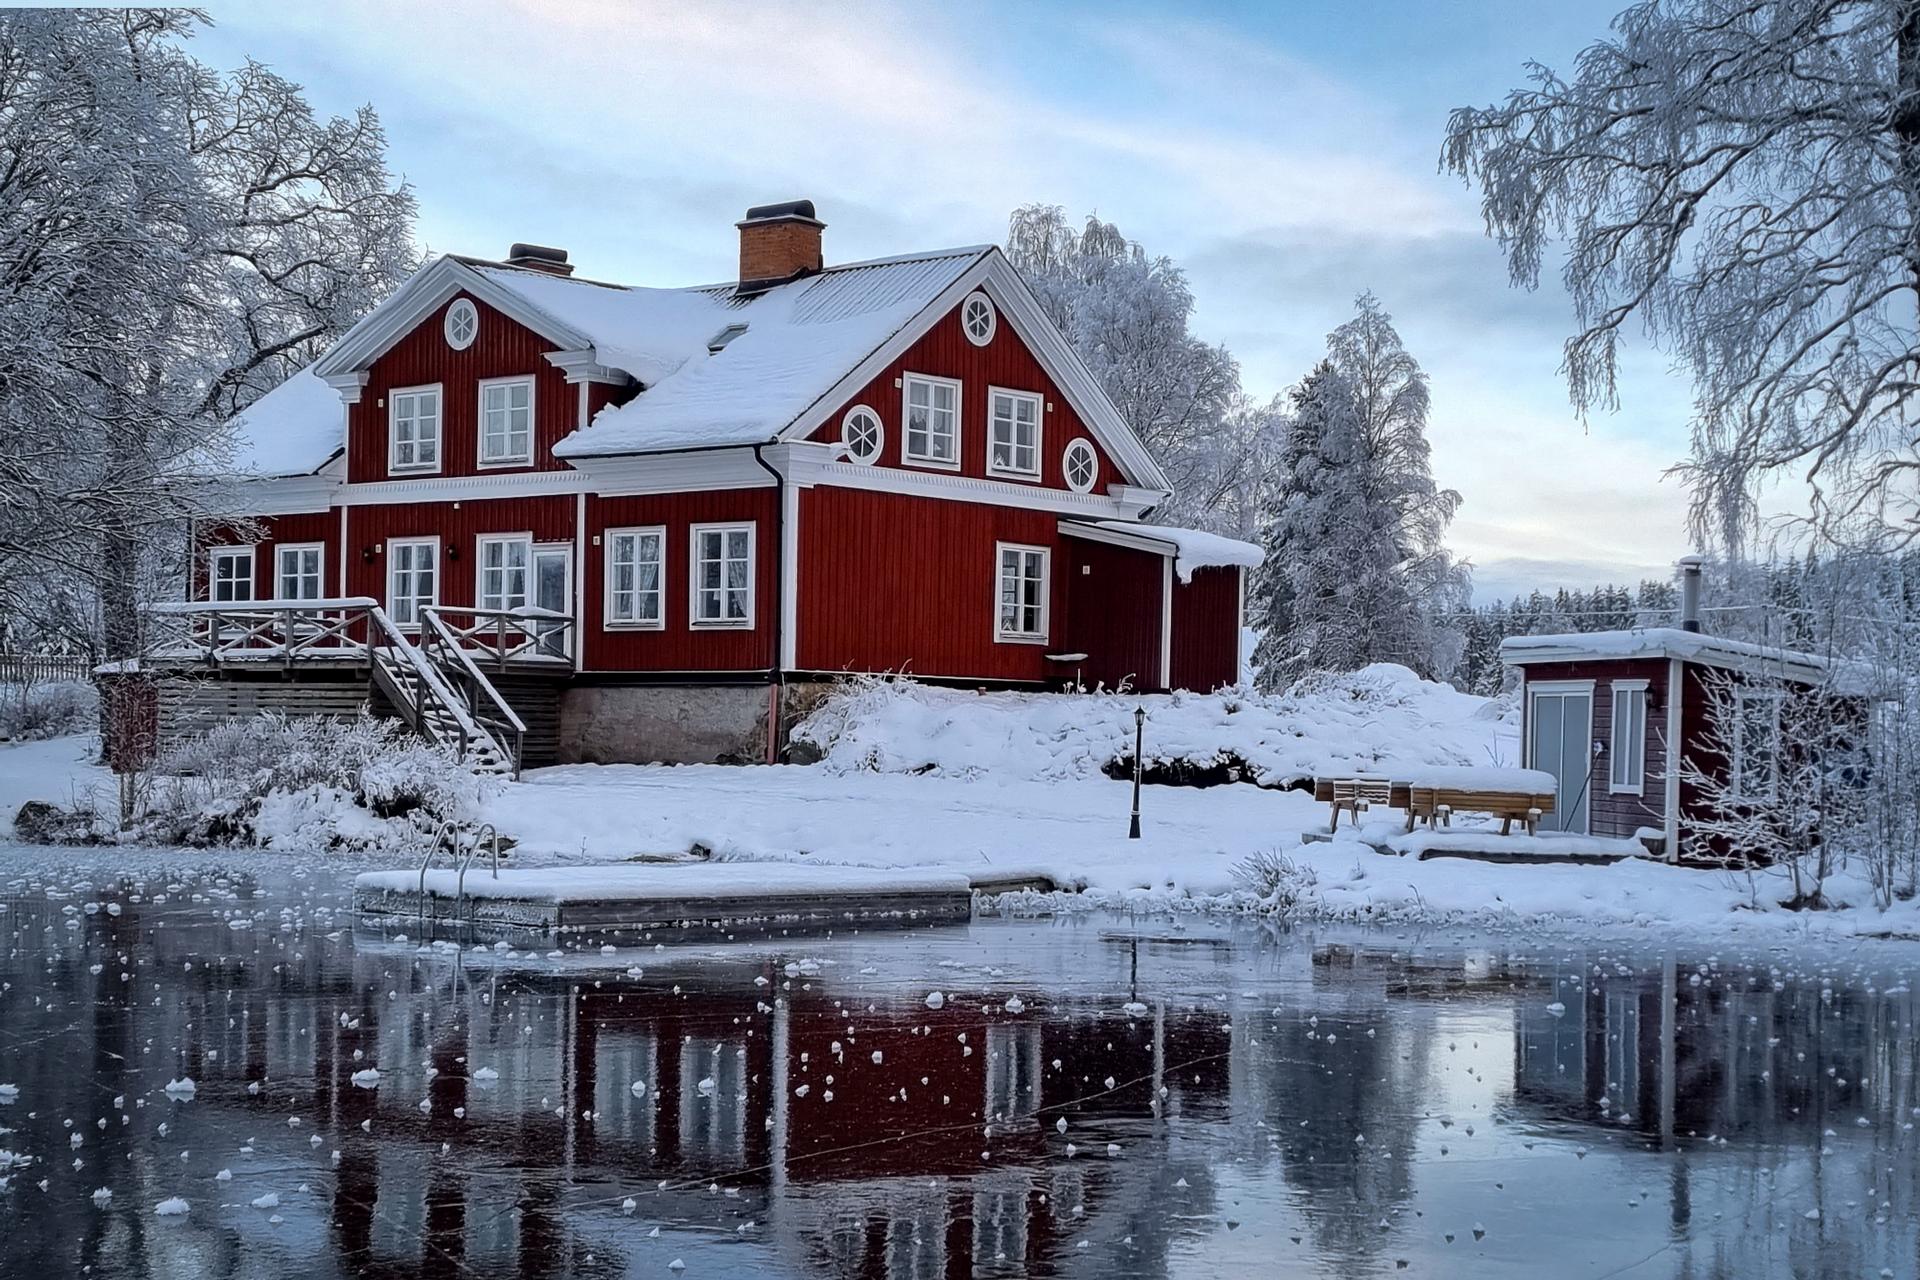 The river lodge is in the middle of a snowy winter landscape with ice on the lake and snow on the trees.